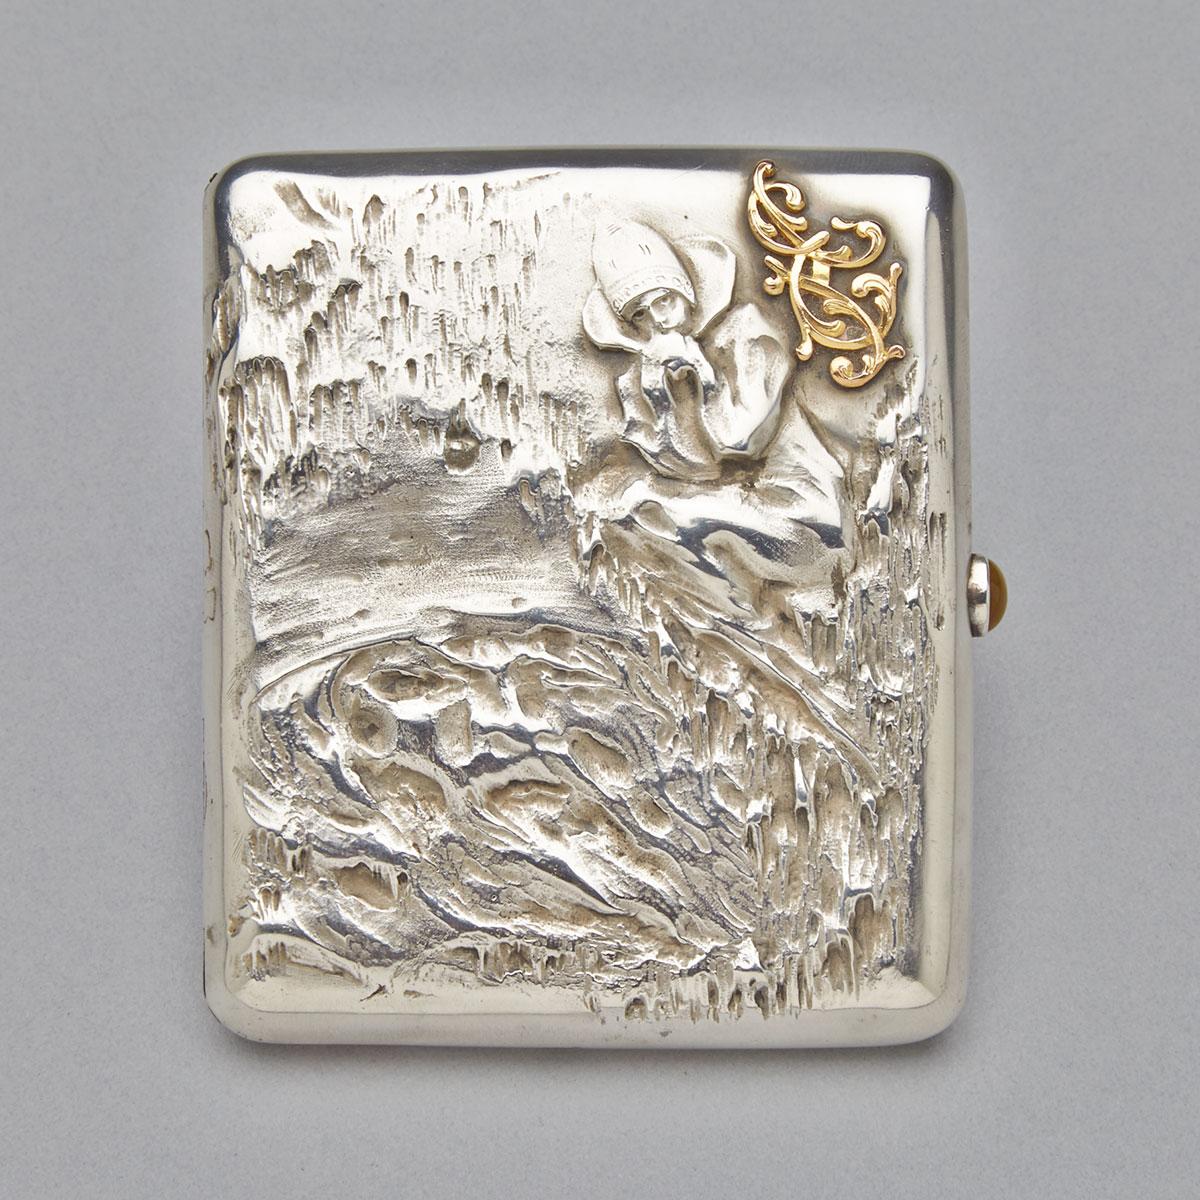 Russian Silver Rectangular Cigarette Case, Moscow, c.1899-1908